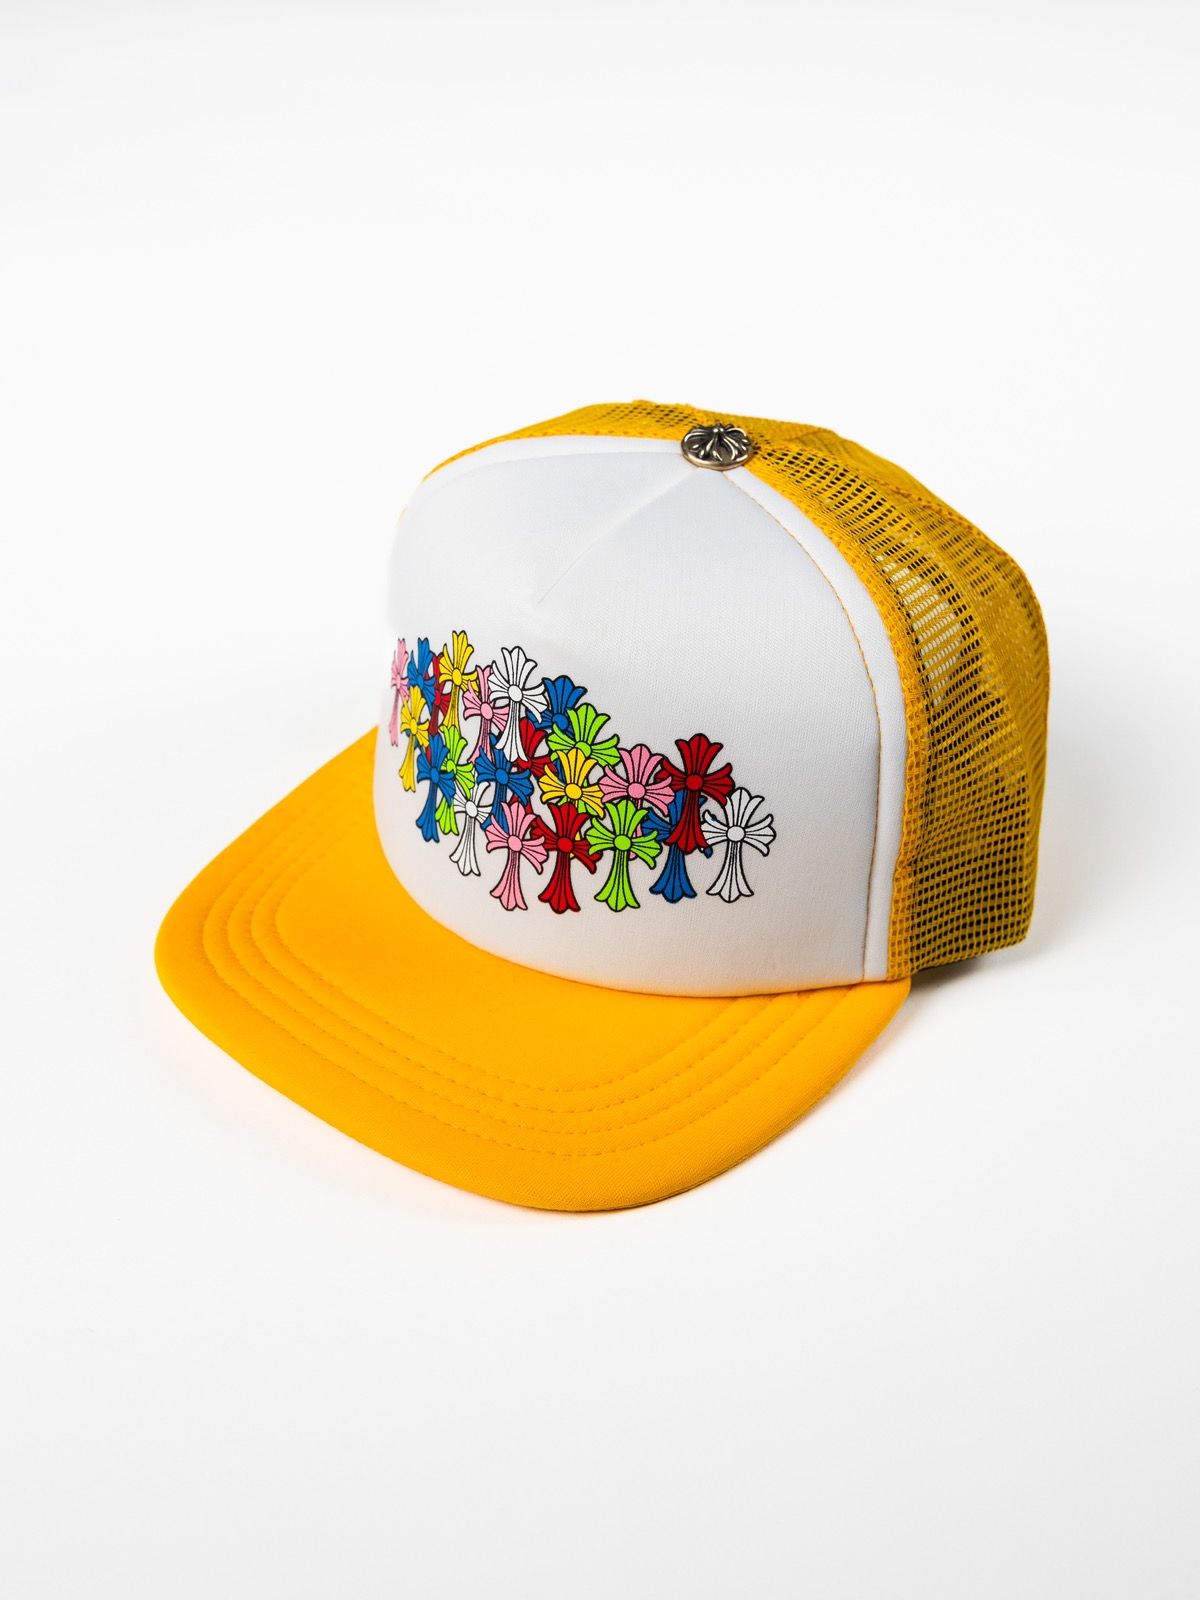 Pre-owned Chrome Hearts Multi Color Cross Trucker Hat Yellow